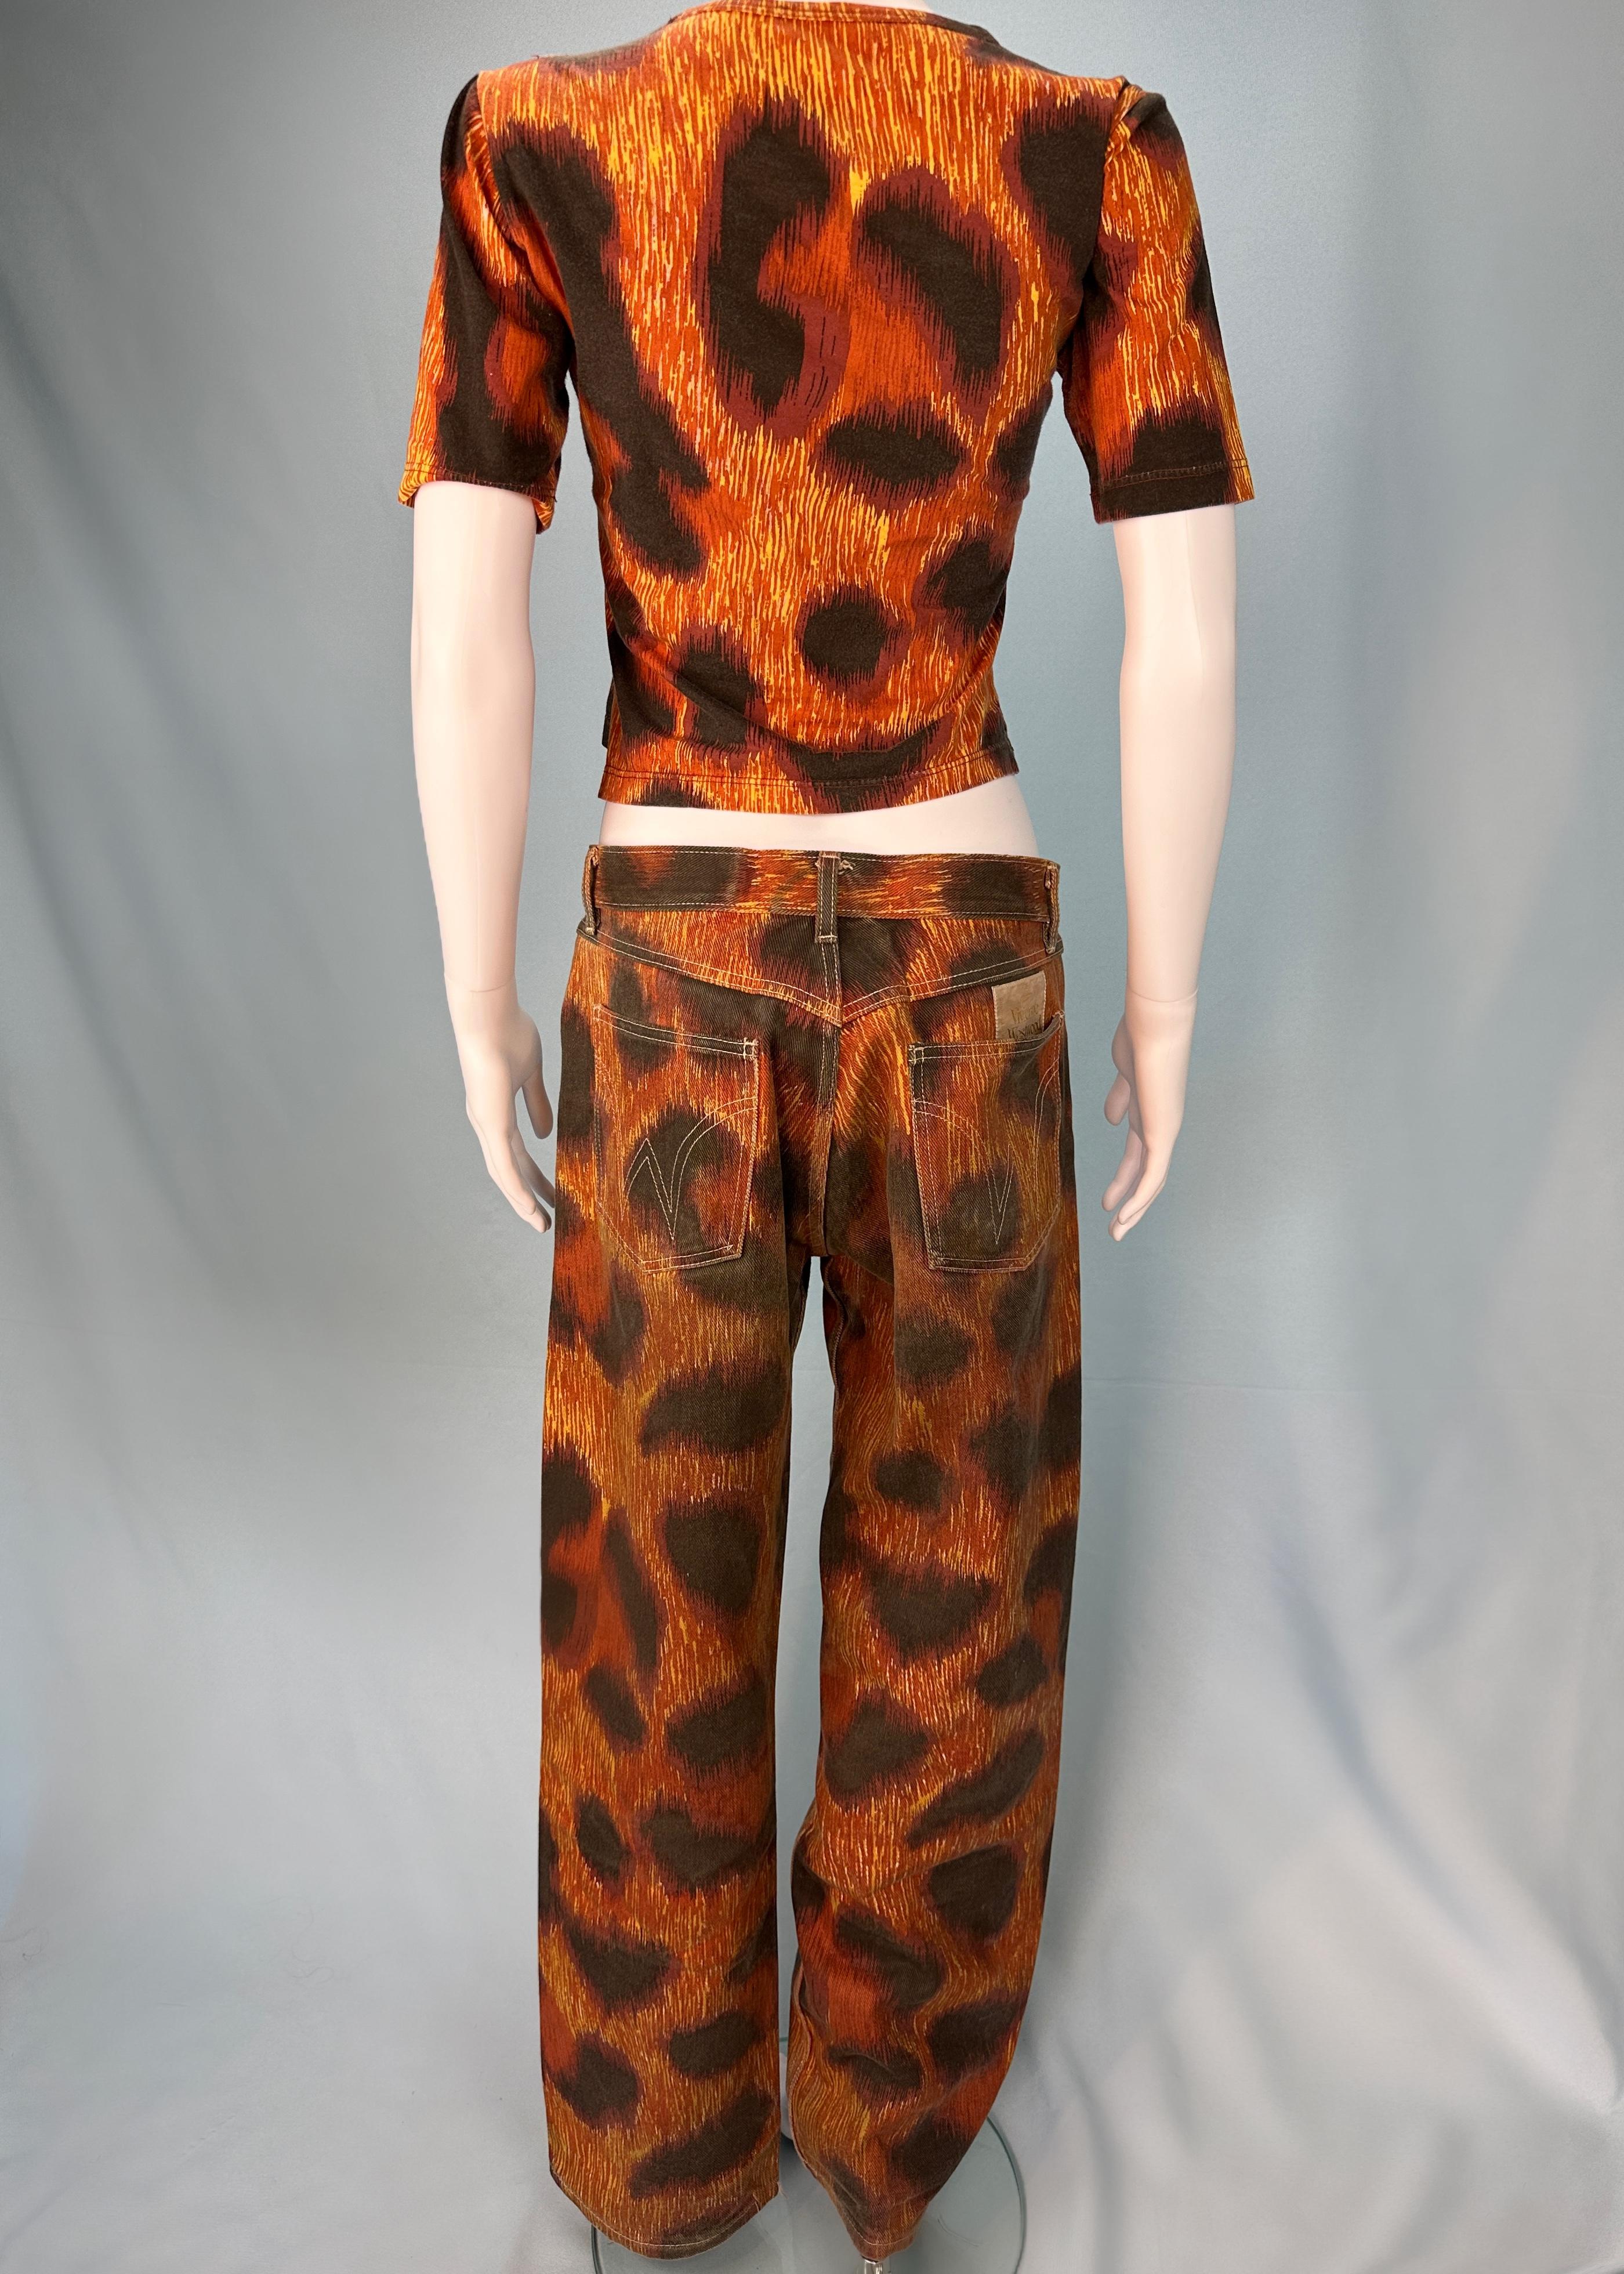 Vivienne Westwood Spring 1994 “Cafe Society” Runway Leopard Jeans & T Shirt Set In Good Condition For Sale In Hertfordshire, GB